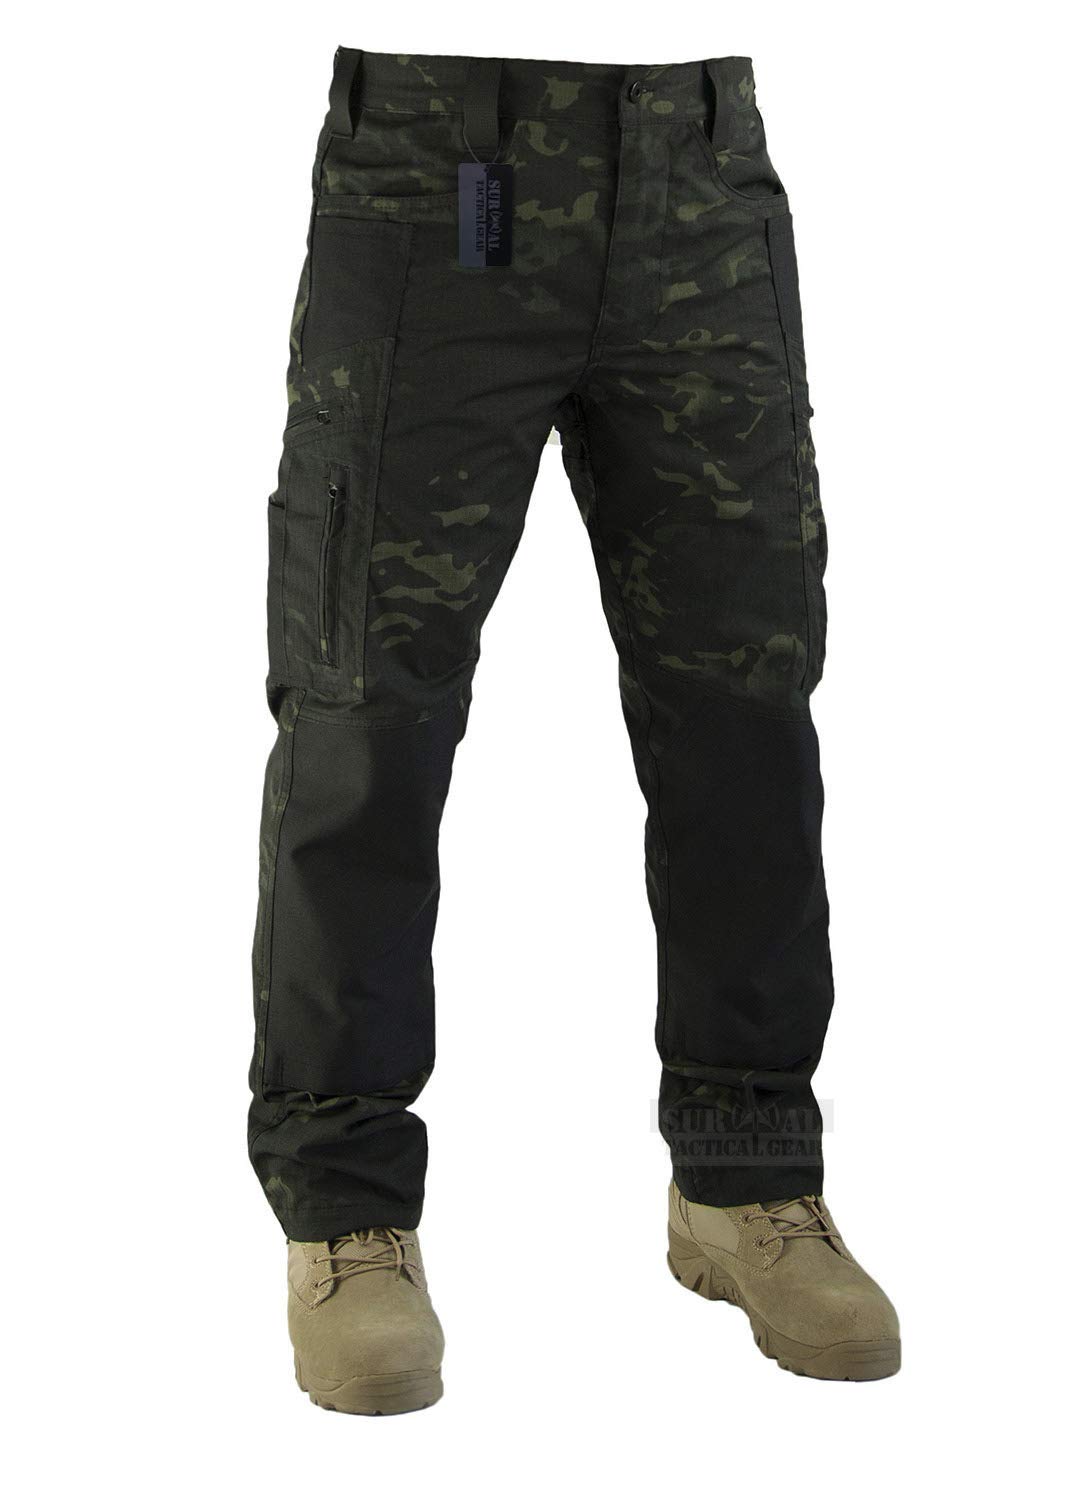 Survival Tactical Gear Pants with Knee Pads Paintball Combat Trousers for  Men | eBay